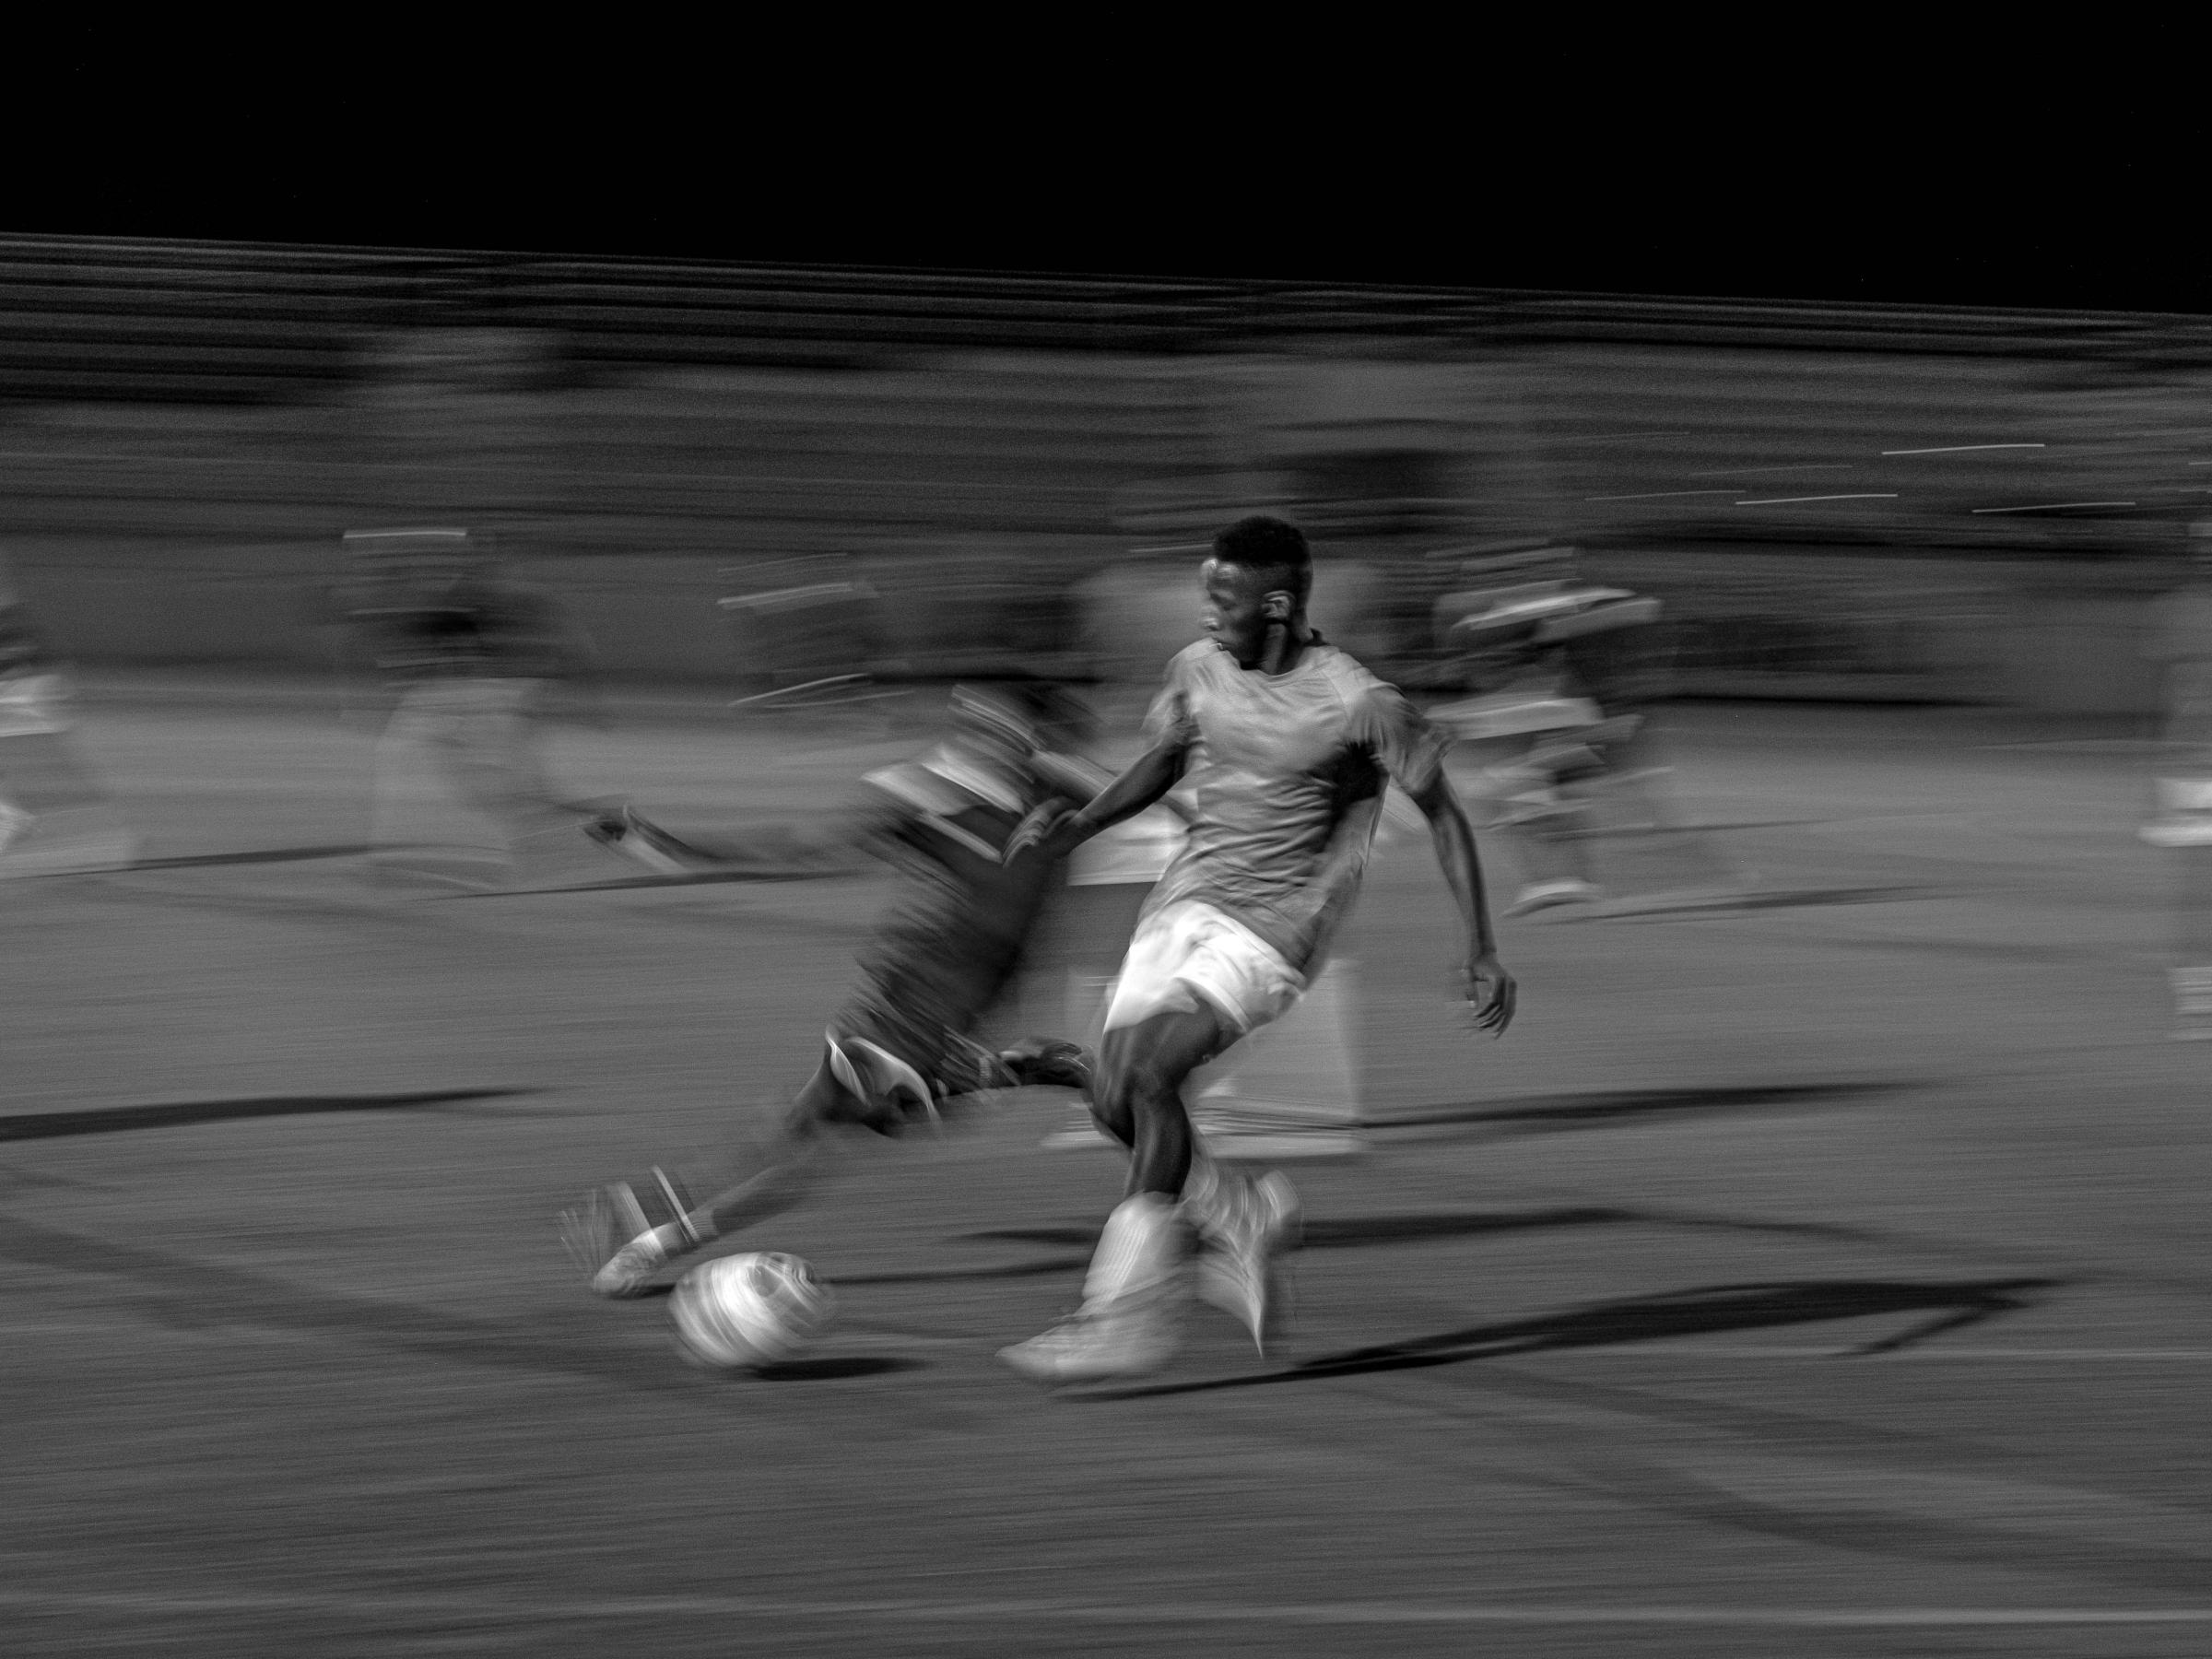 Almanzora's dust - A blur of motion as a player from the Senegalese team in...